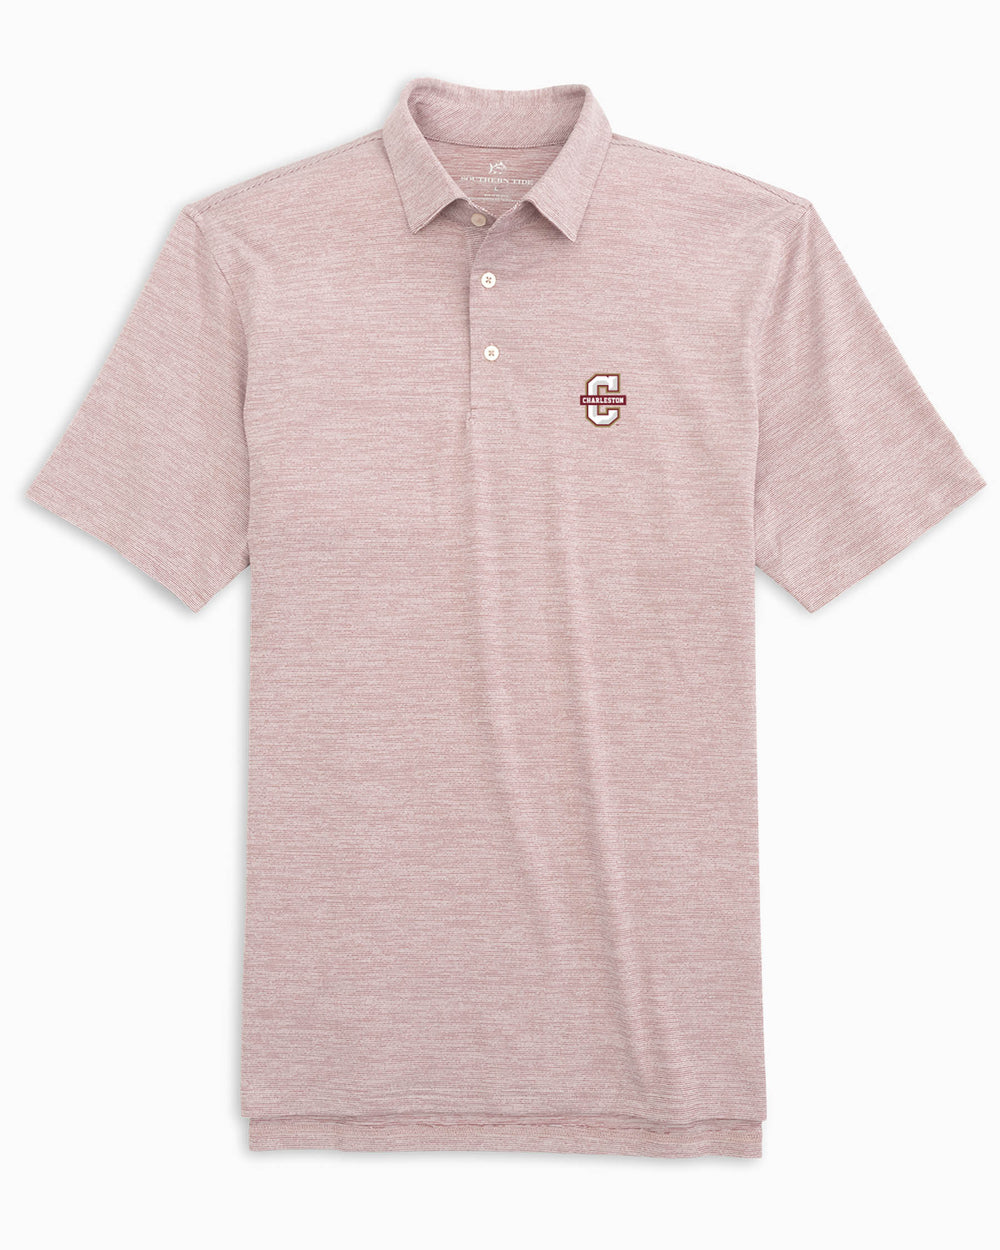 The front of the College of Charleston Driver Spacedye Polo Shirt by Southern Tide - Chianti